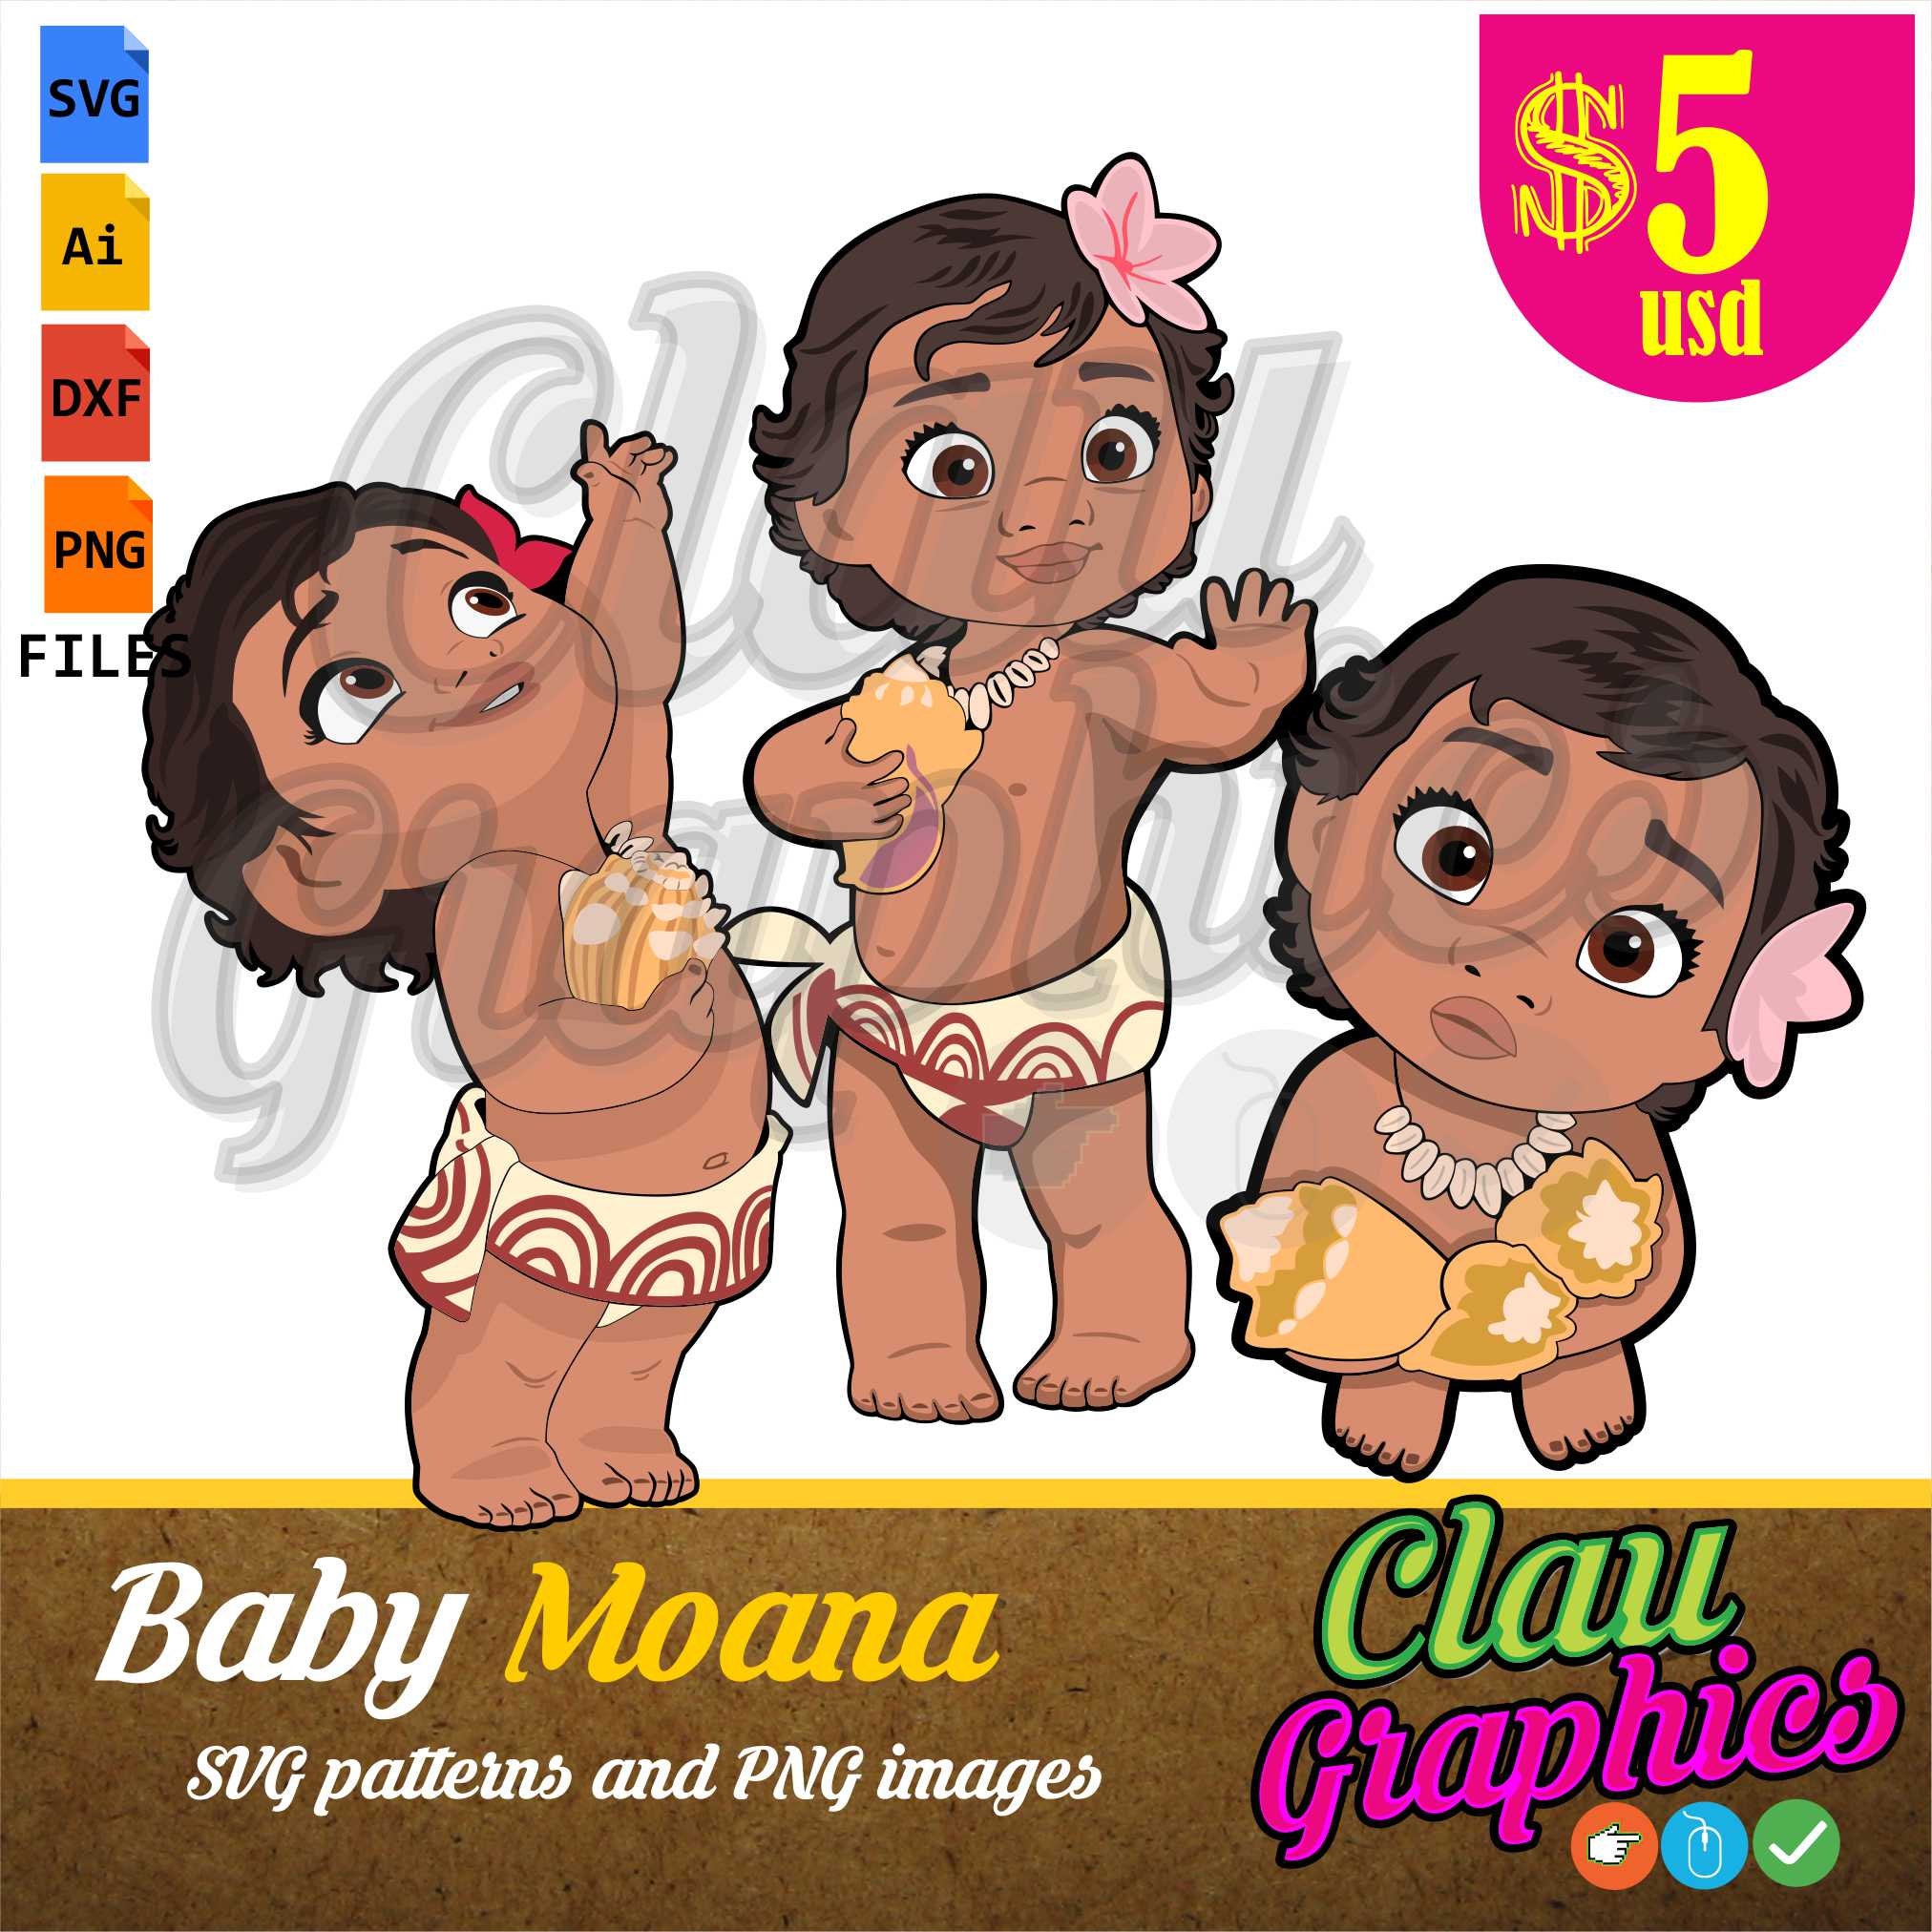 Download Baby MOANA movie digital collection SVG patterns and editable